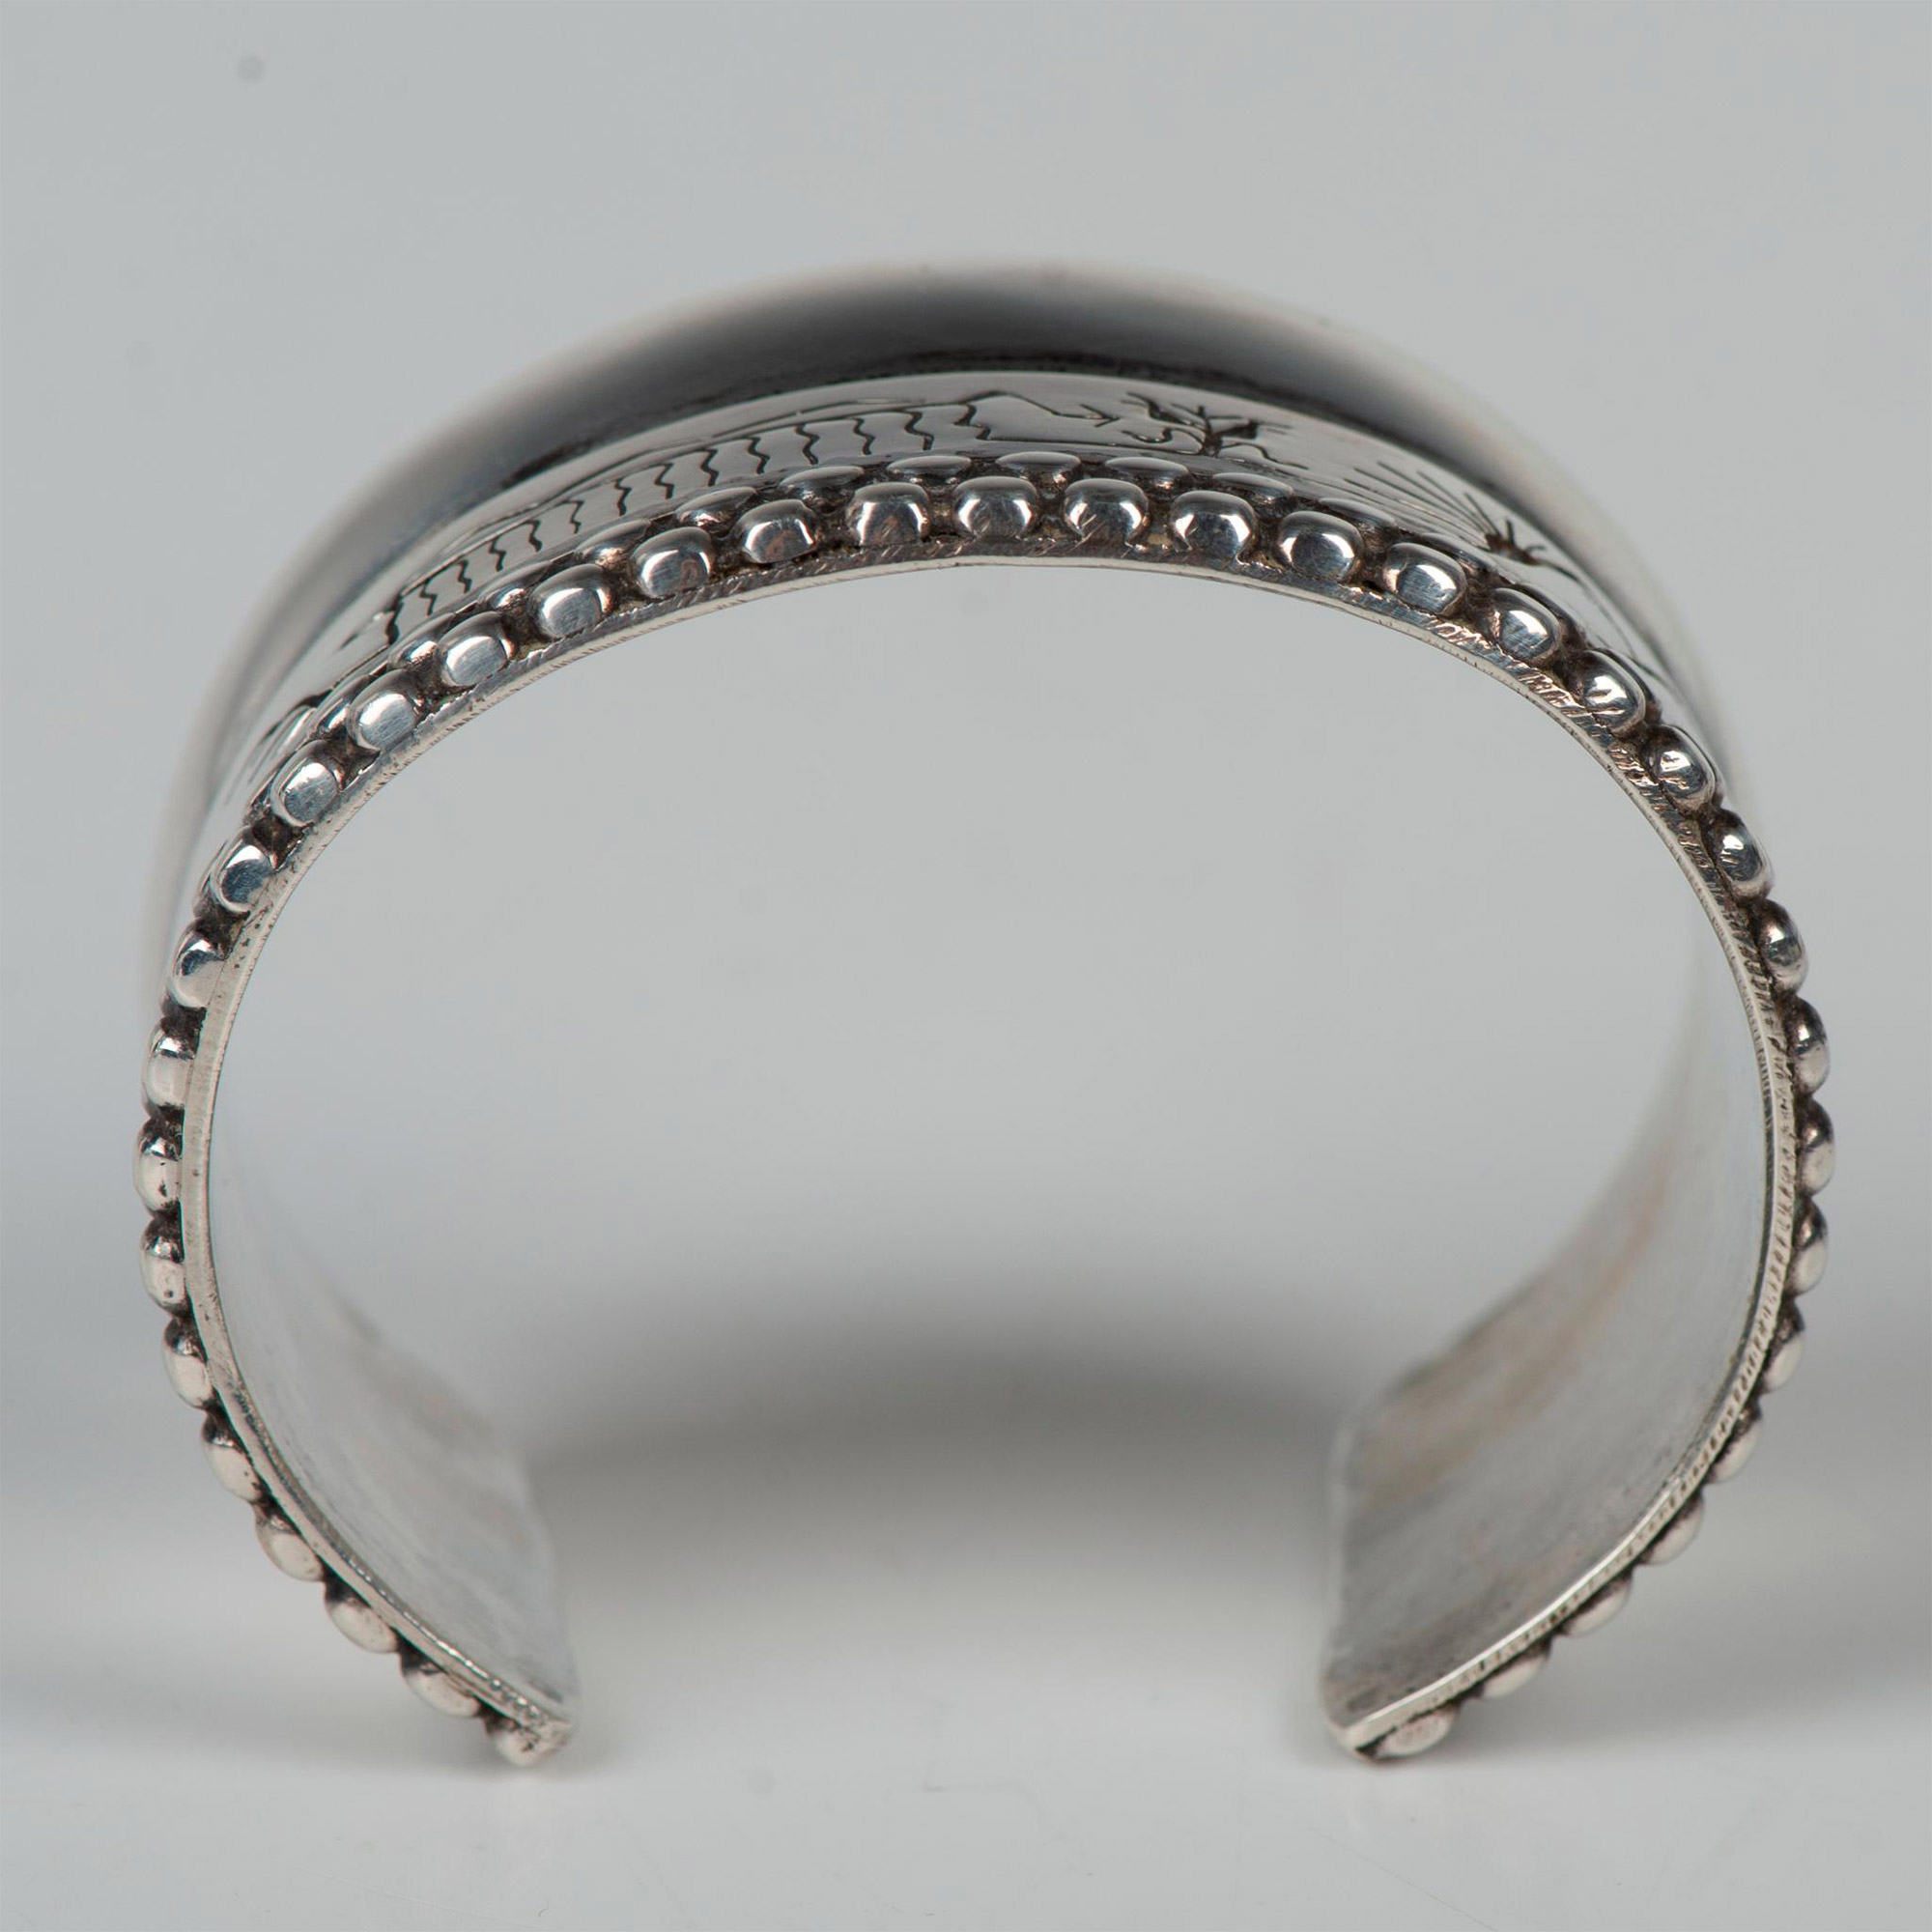 Larry PachecoKewa Heavy Southwestern Etched Sterling Silver Cuff Bracelet - Image 7 of 7